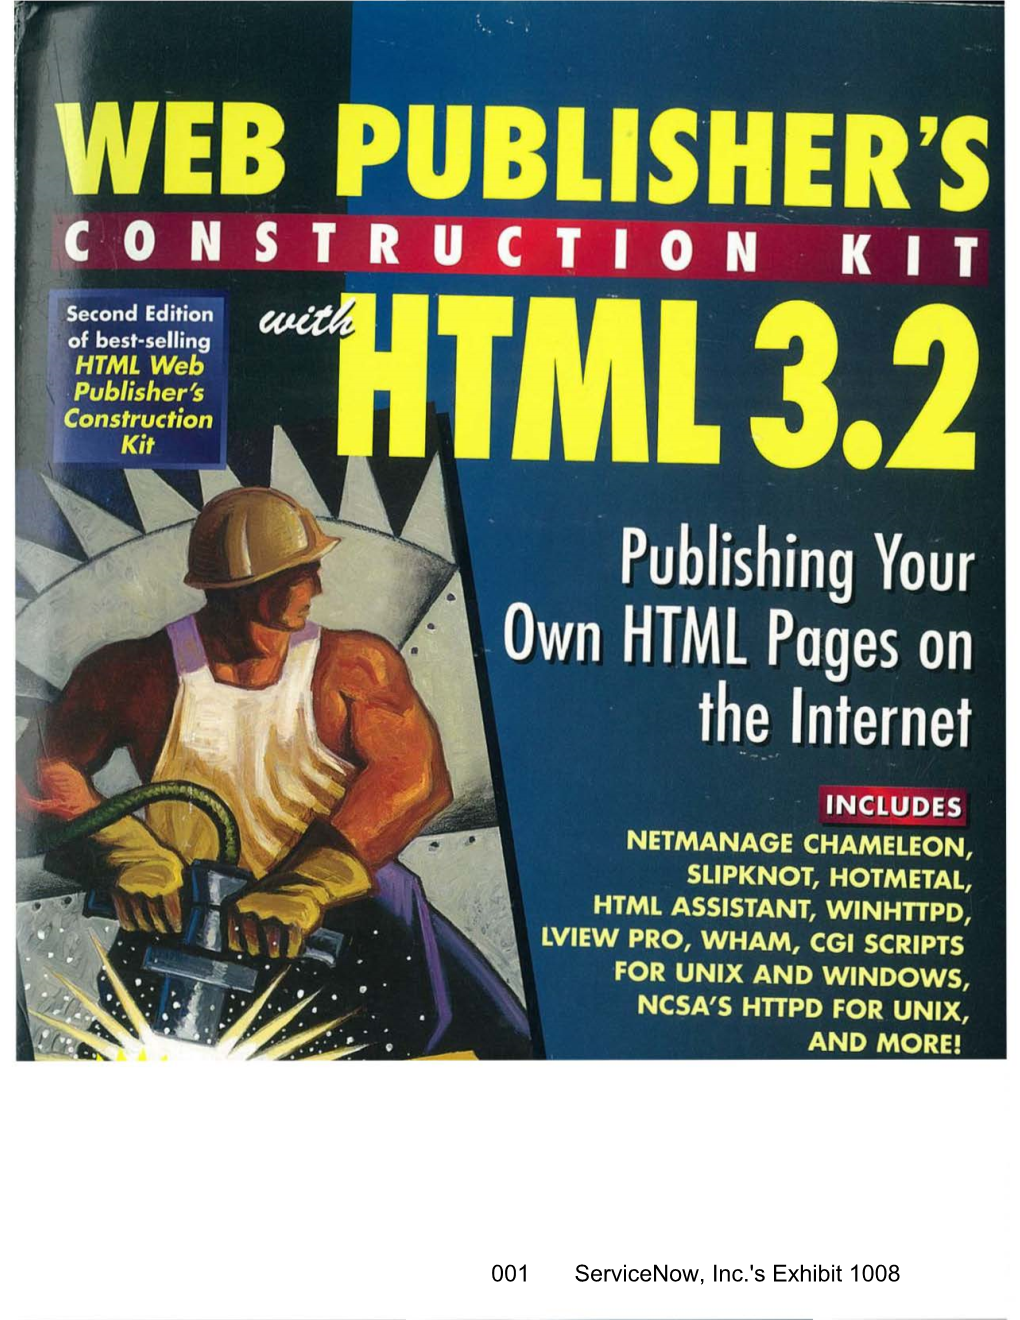 Fox, Web Publisher's Construction Kit with HTML